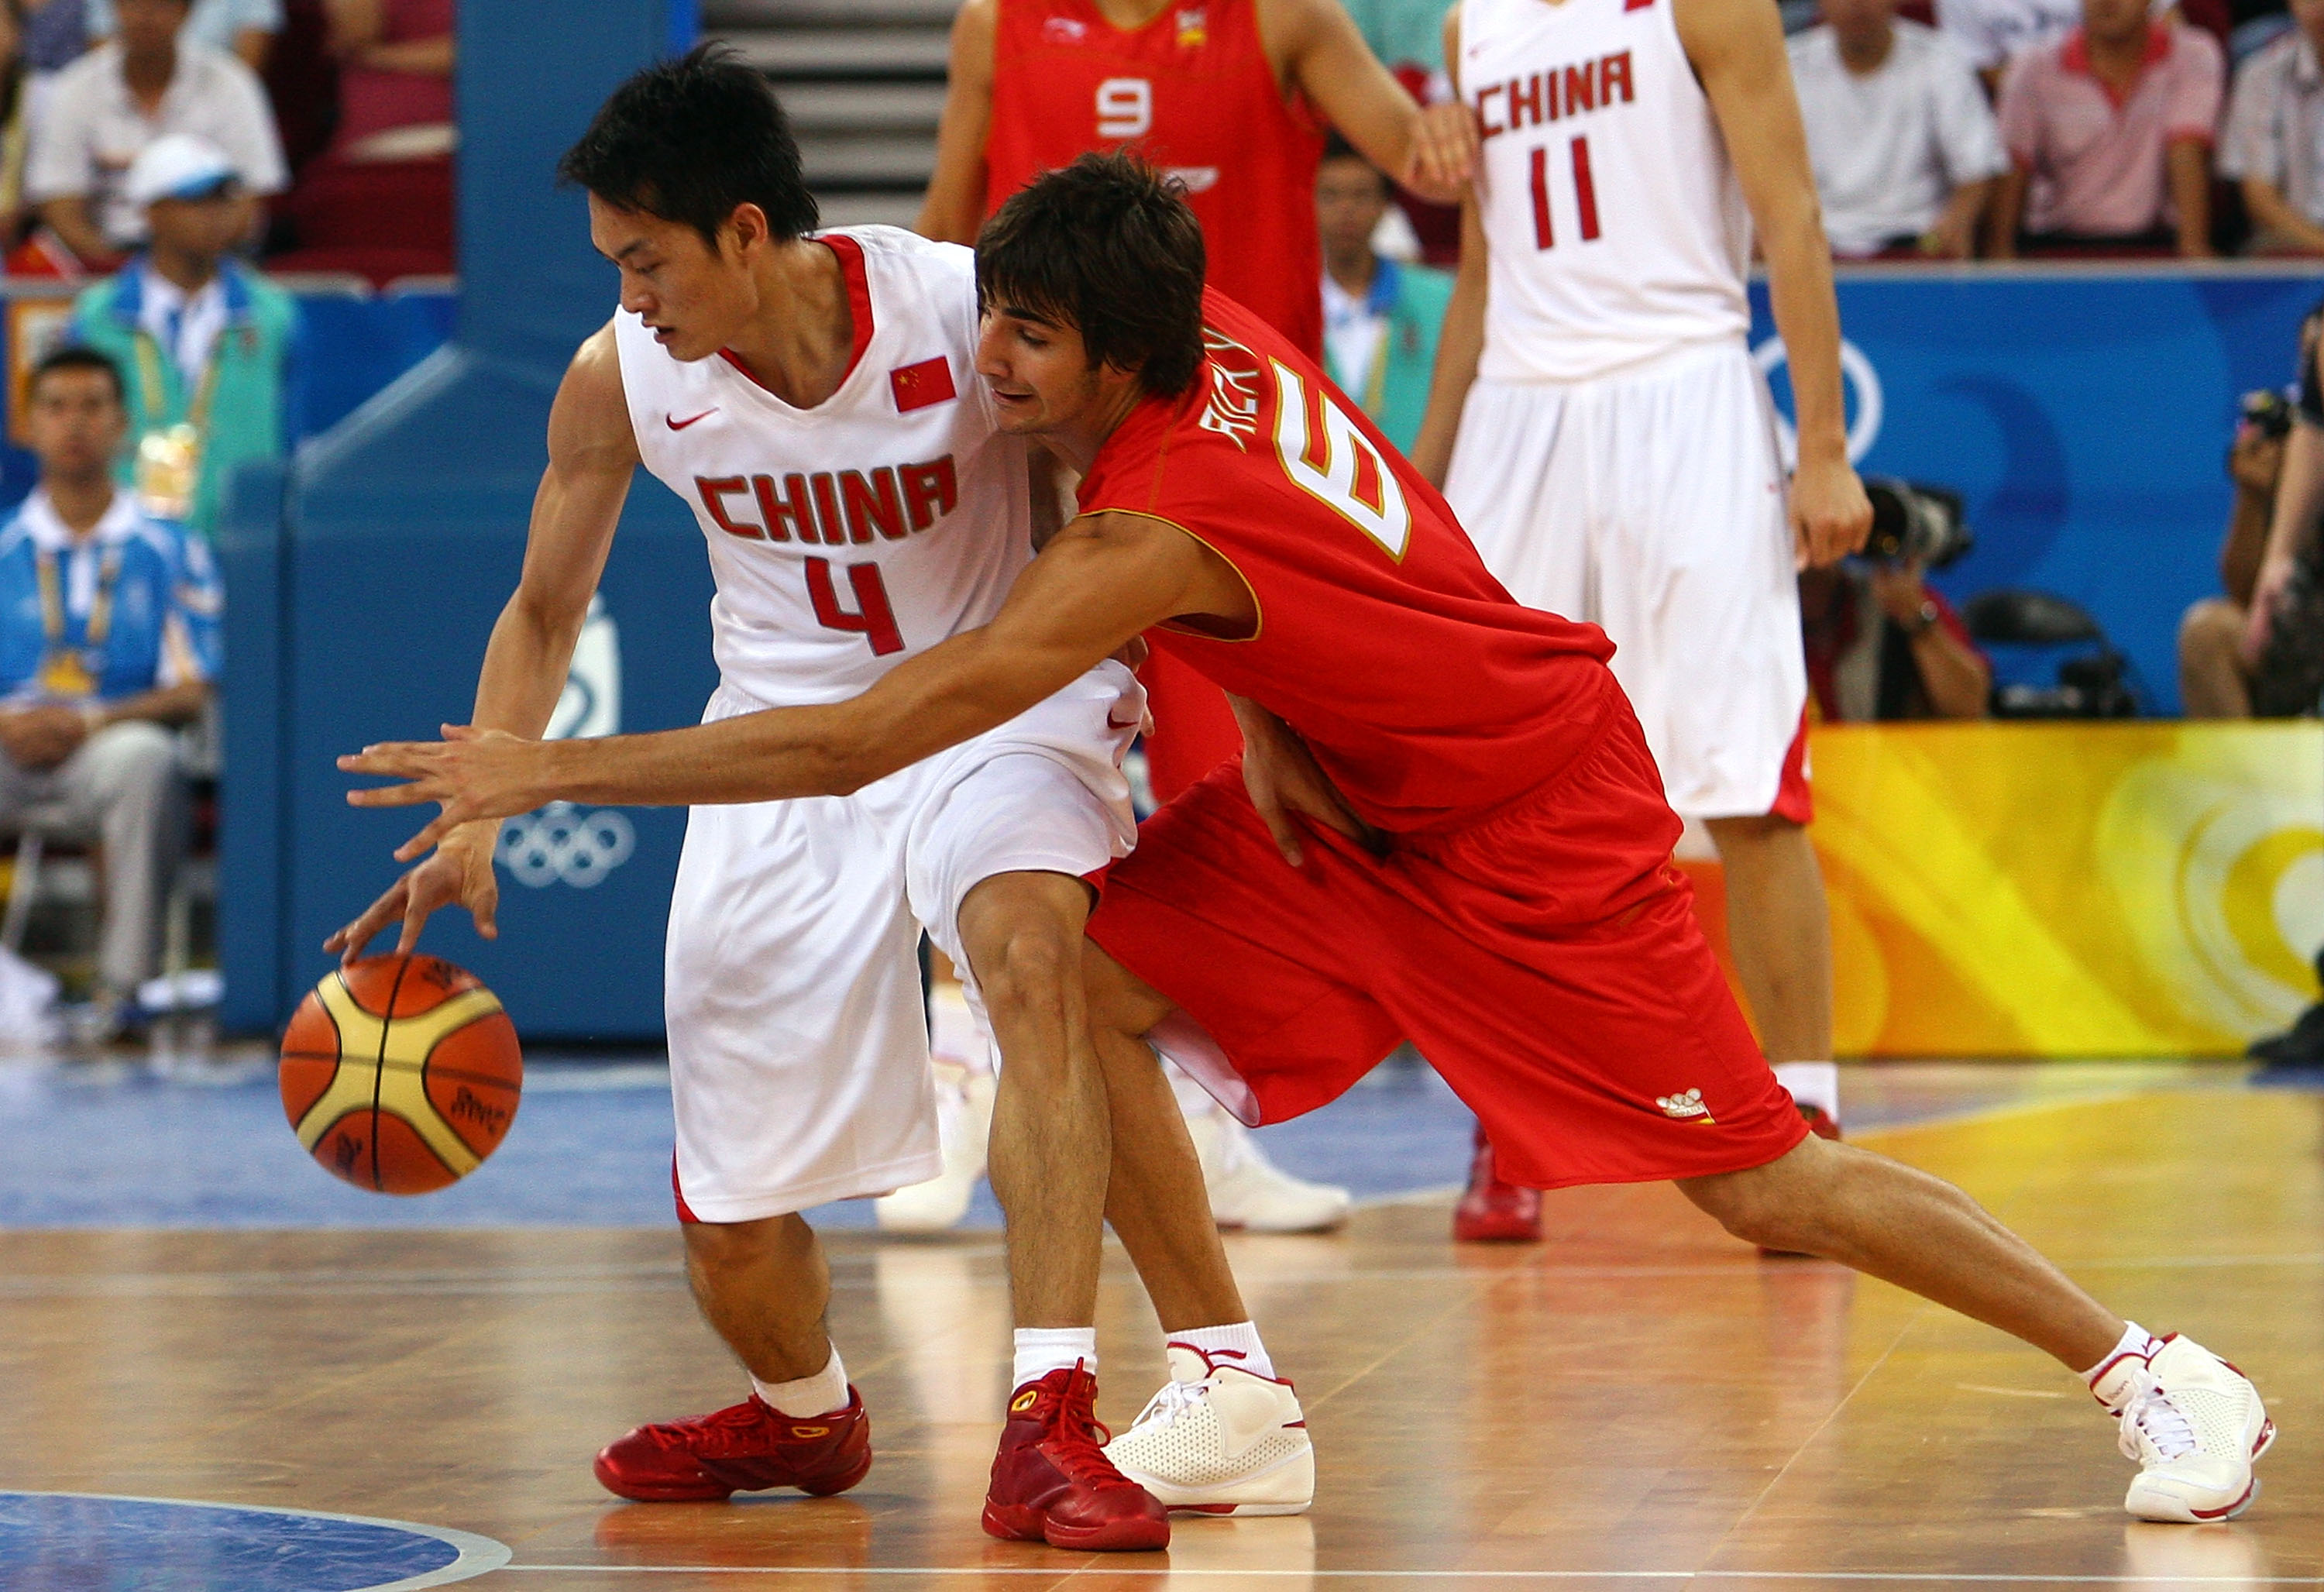 BEIJING - AUGUST 12:  (R-L) Ricky Rubio #6 of Spain attempts to steal the ball from Chen Jianghua #4 of China in the preliminary basketball game held at the Beijing Olympic Basketball Gymnasium during Day 4 of the Beijing 2008 Olympic Games on August 12,